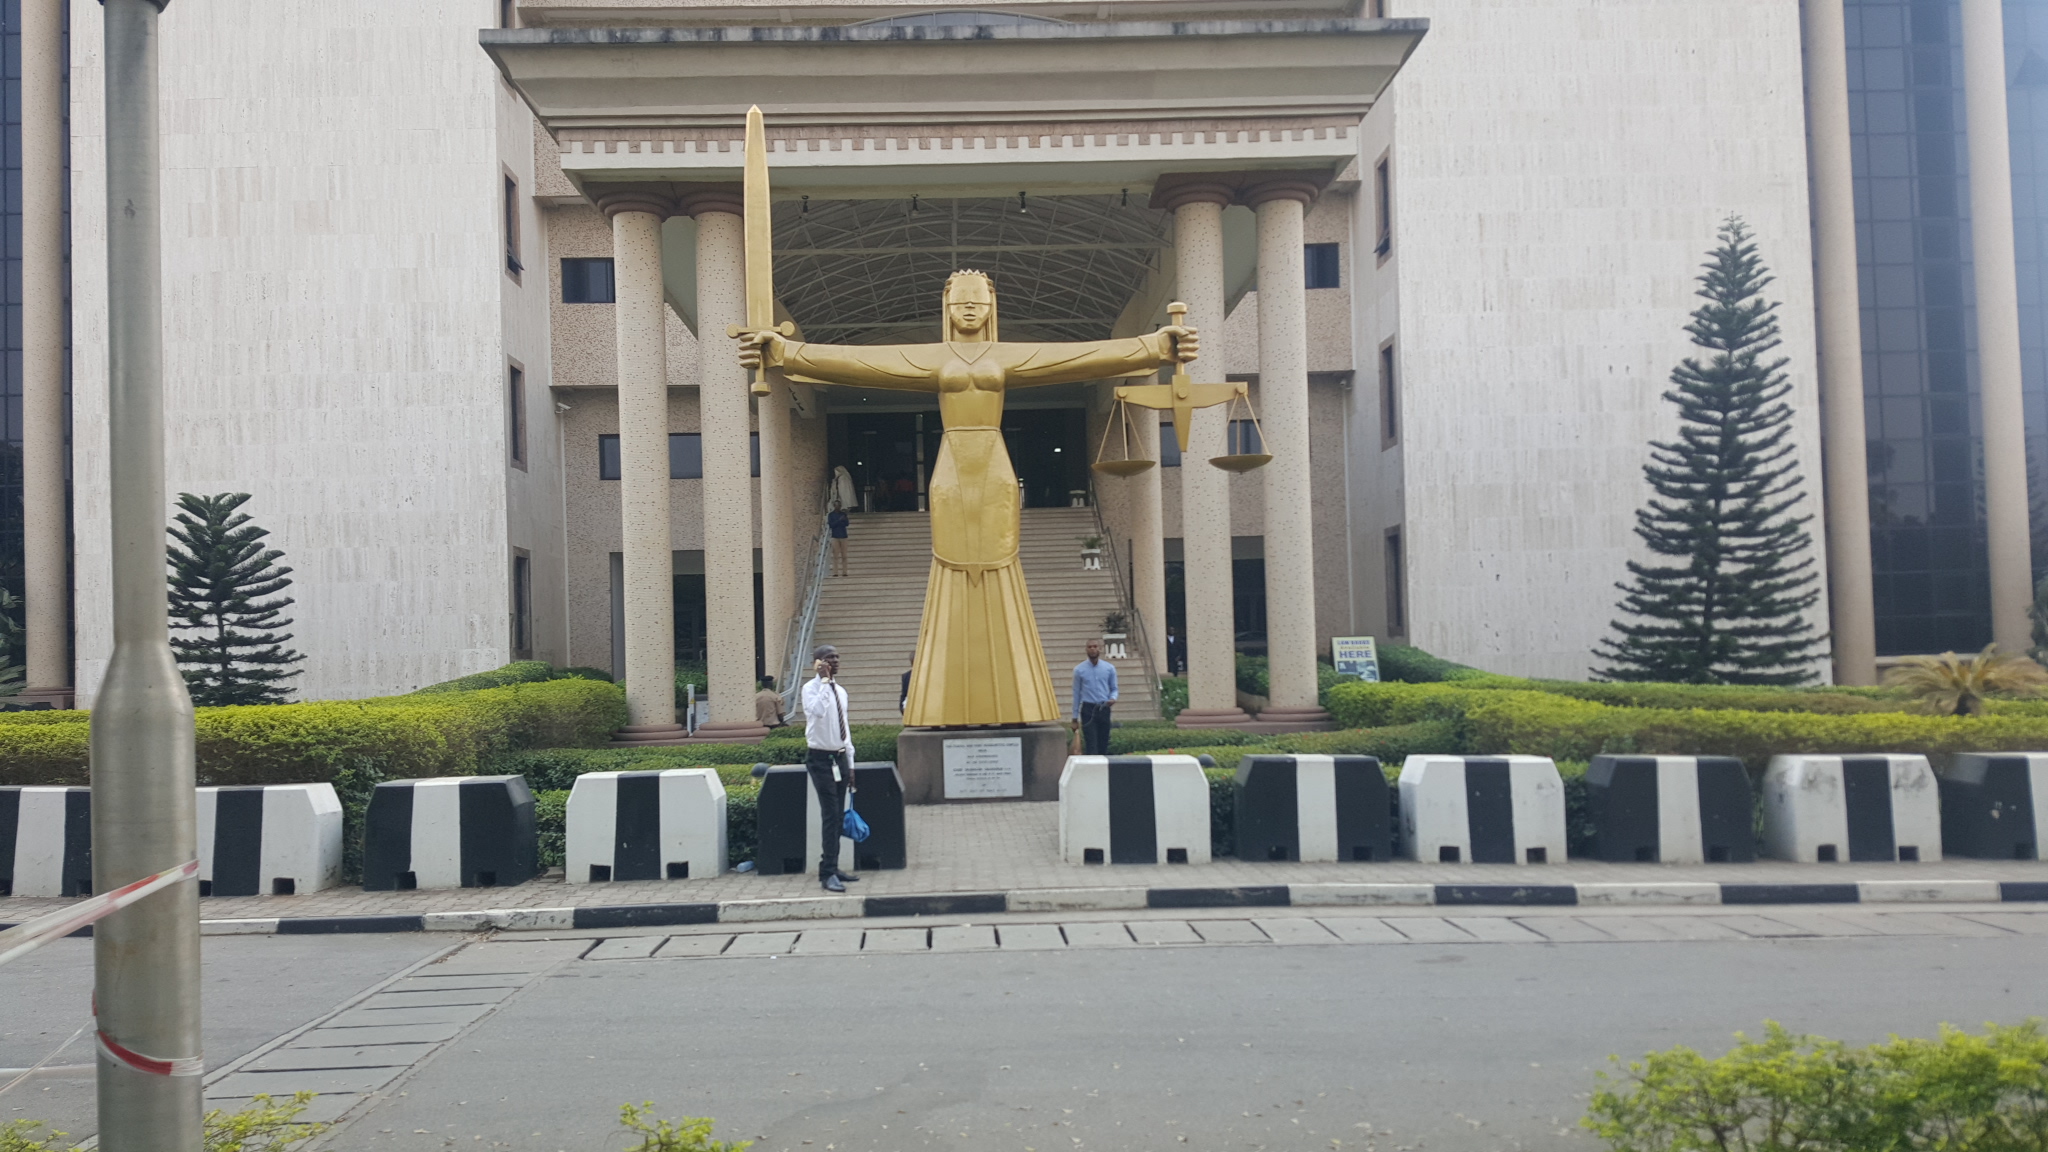 Scanty premises of the Federal High Court, Abuja